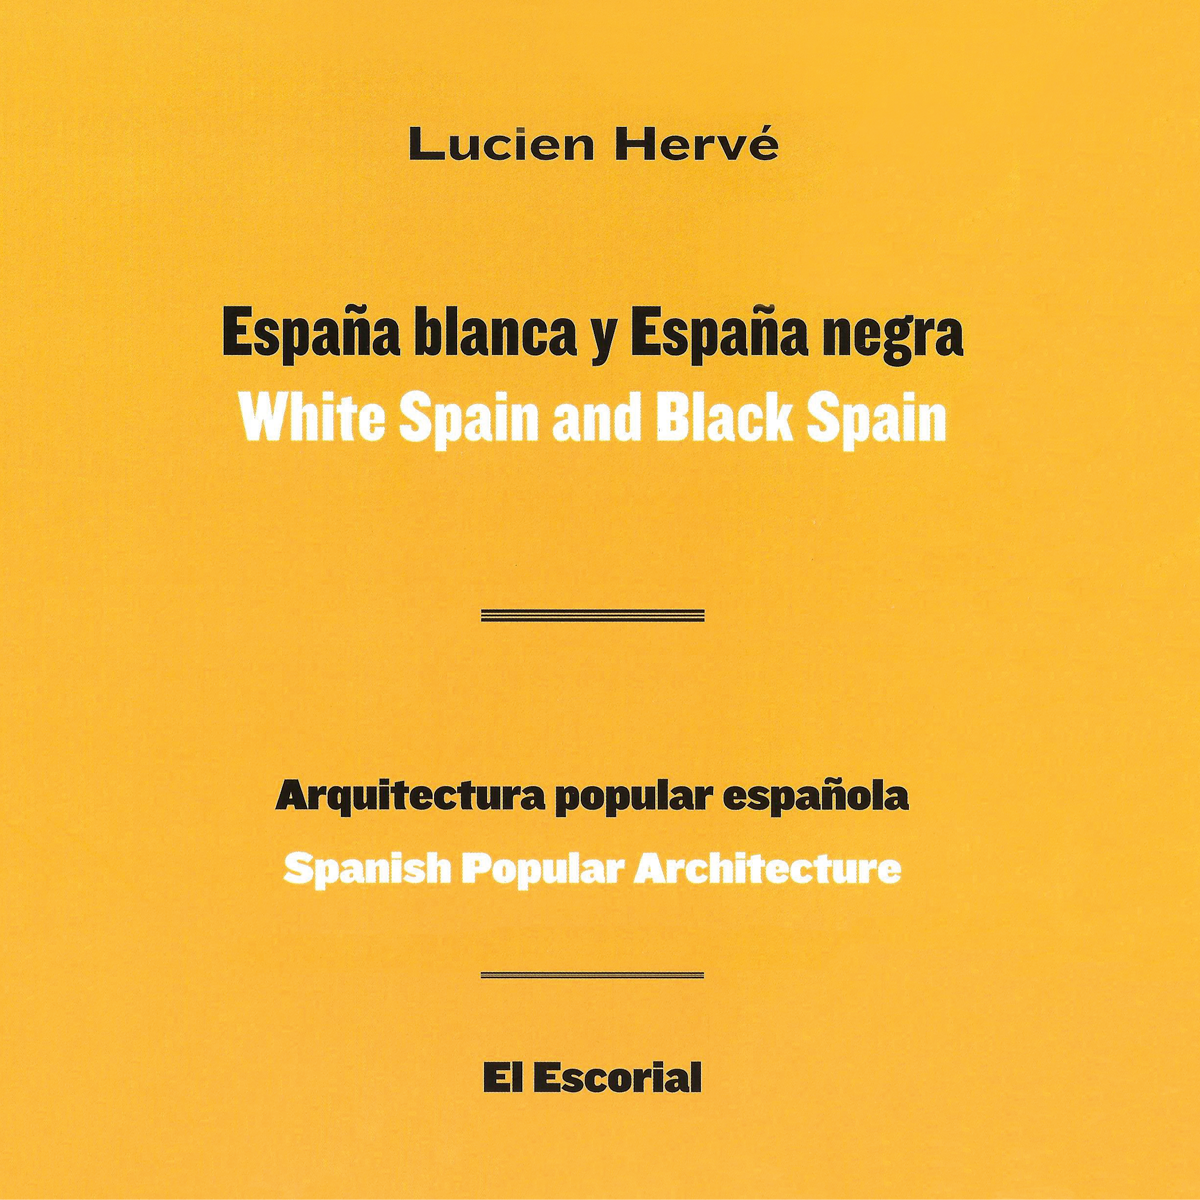 White Spain and Black Spain